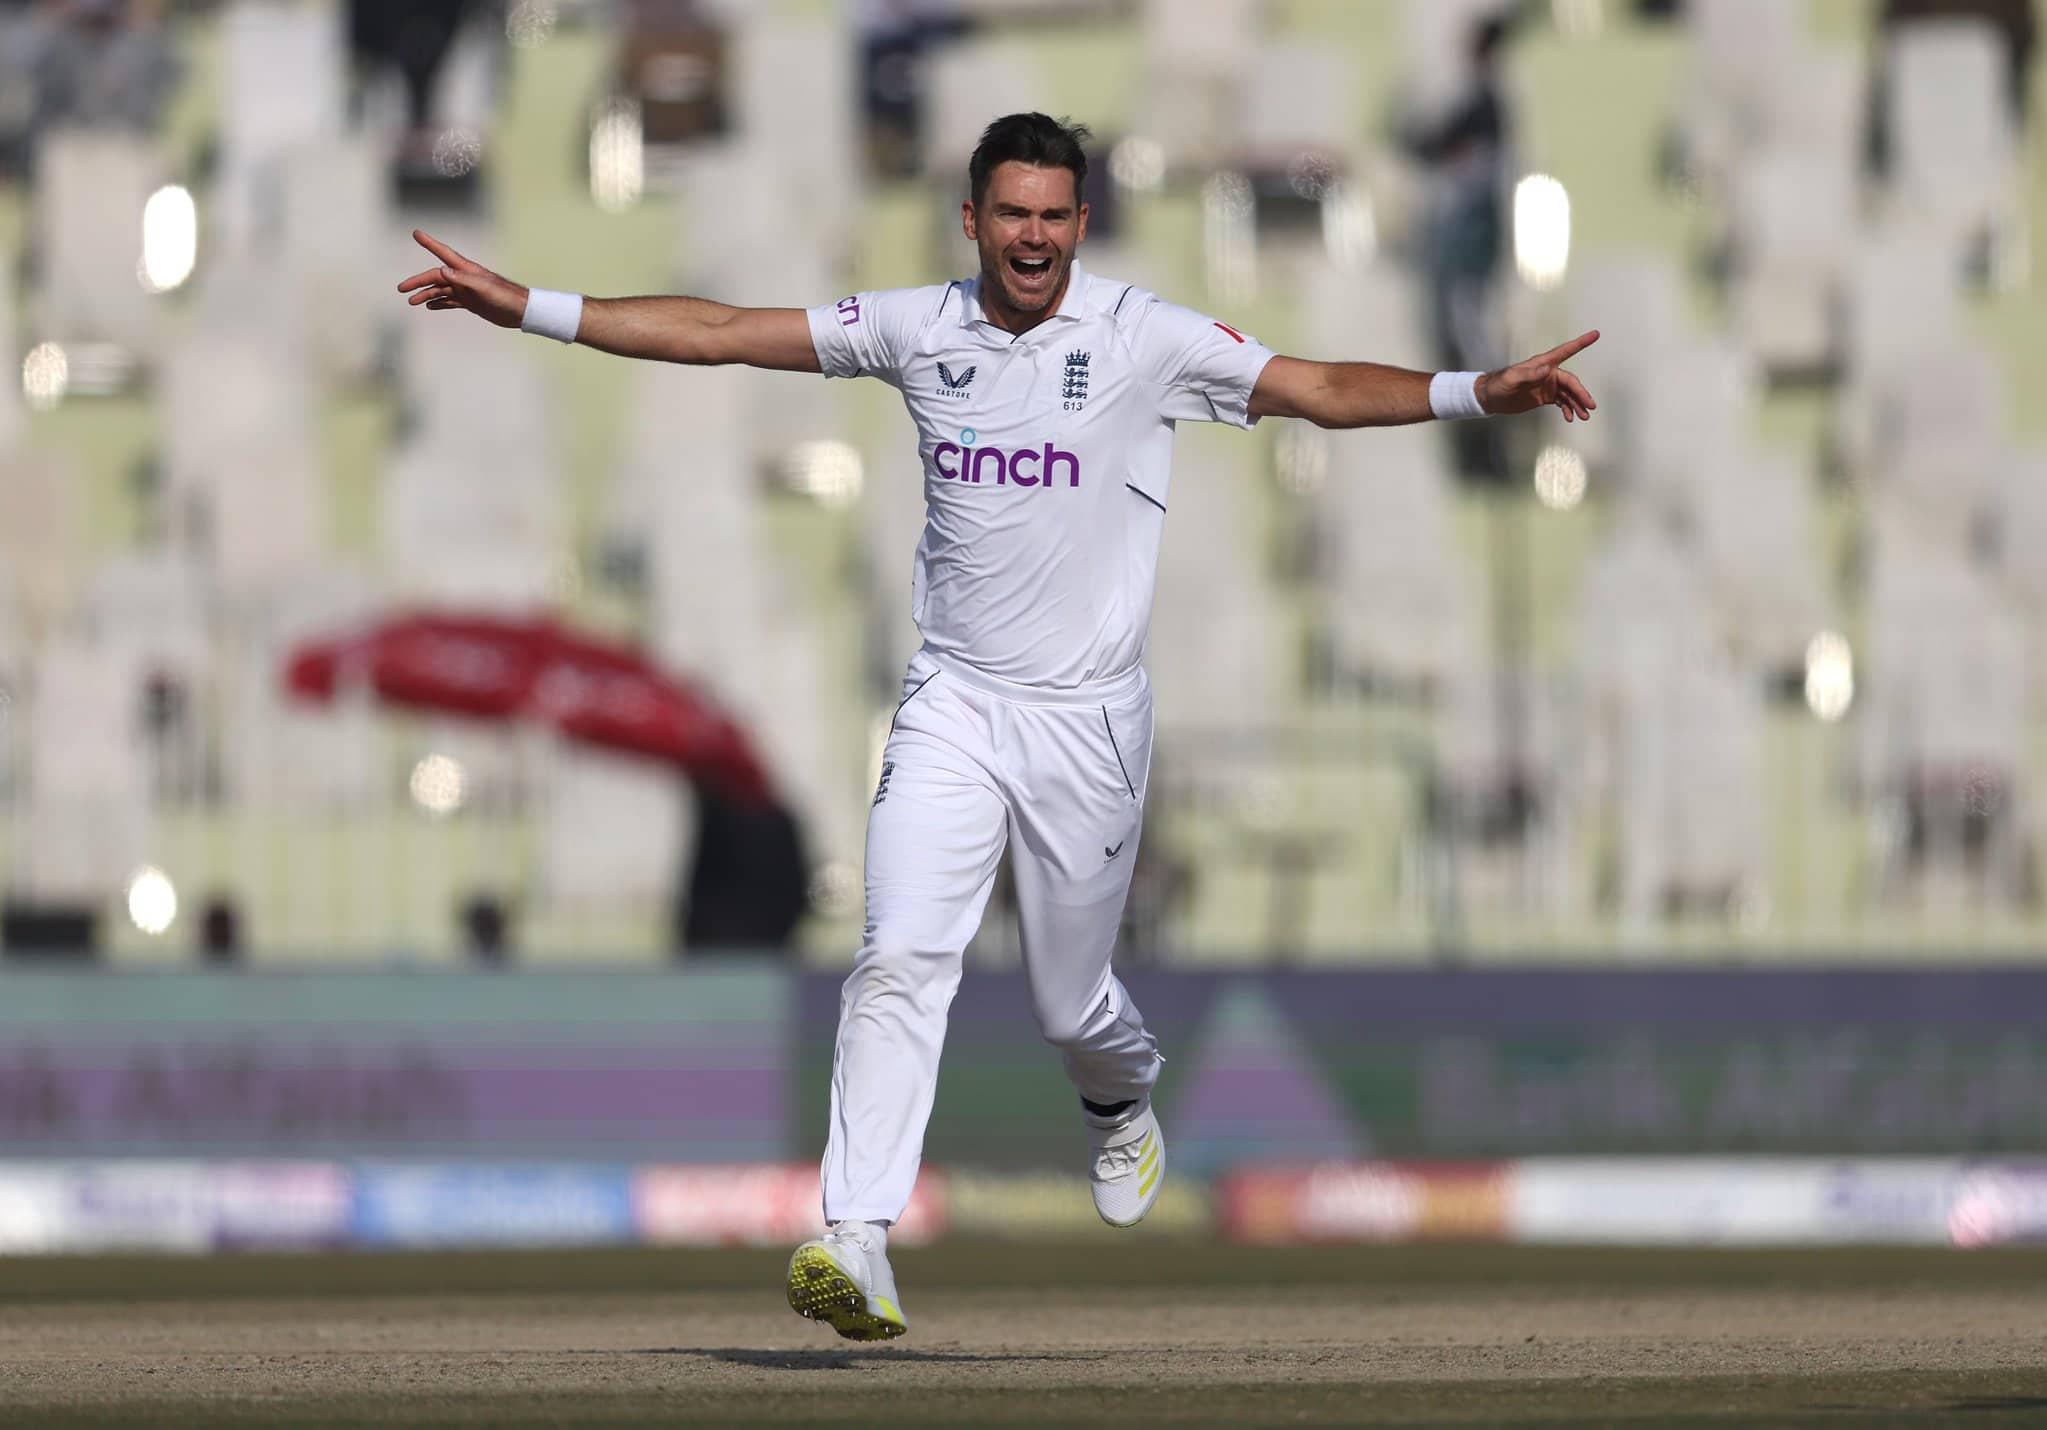 James Anderson has 105 wickets against India in England in Tests (X.com)